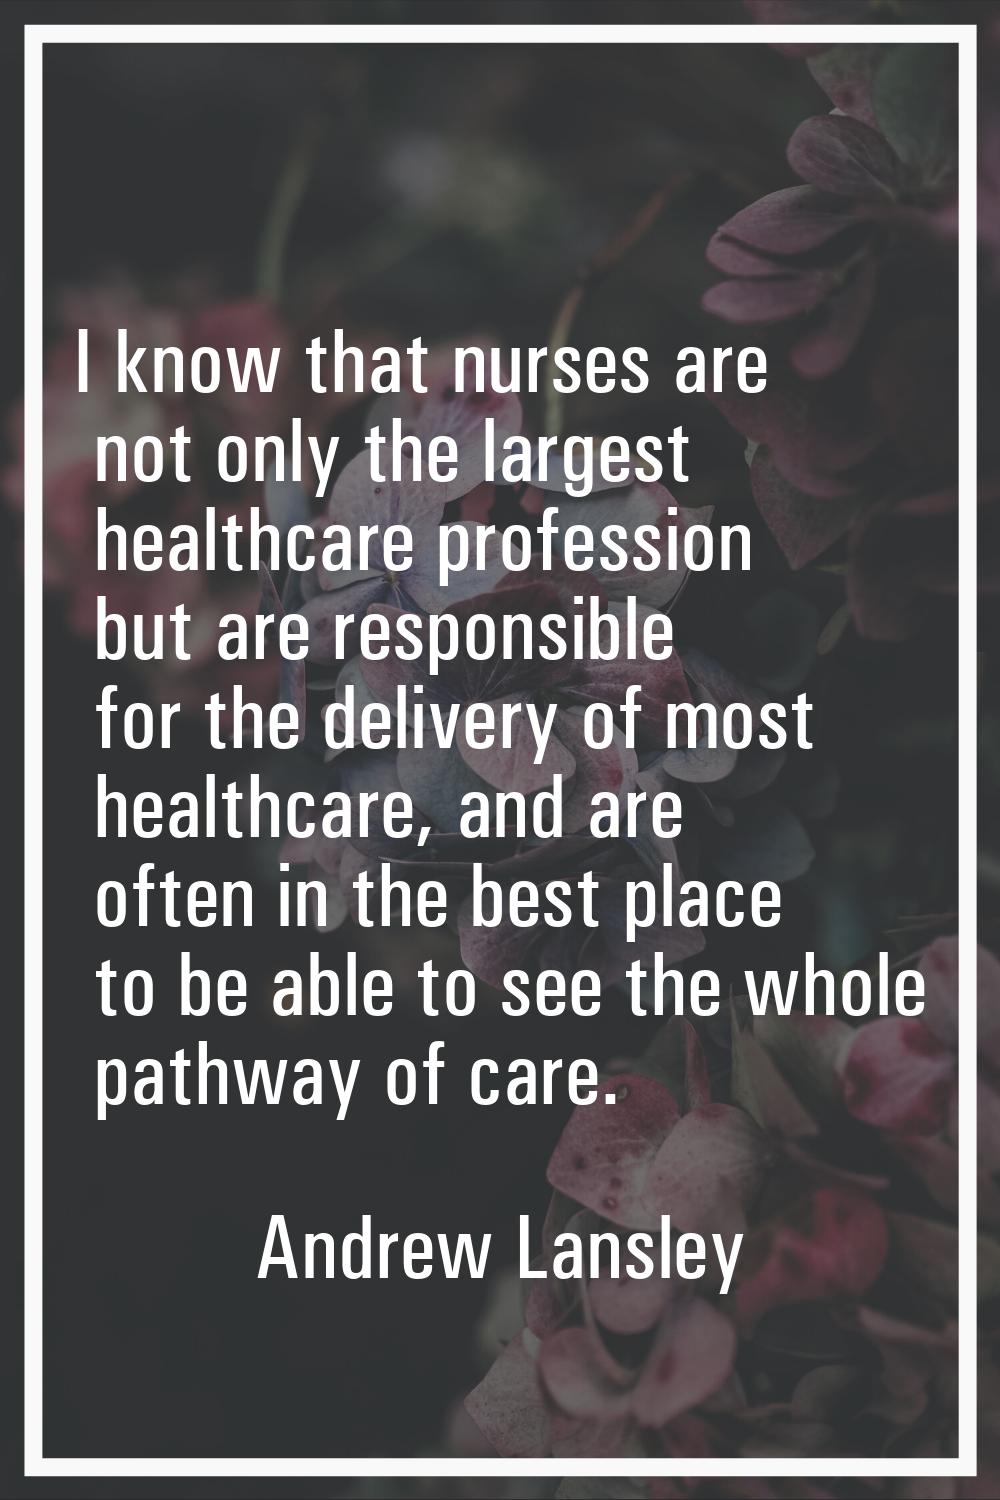 I know that nurses are not only the largest healthcare profession but are responsible for the deliv